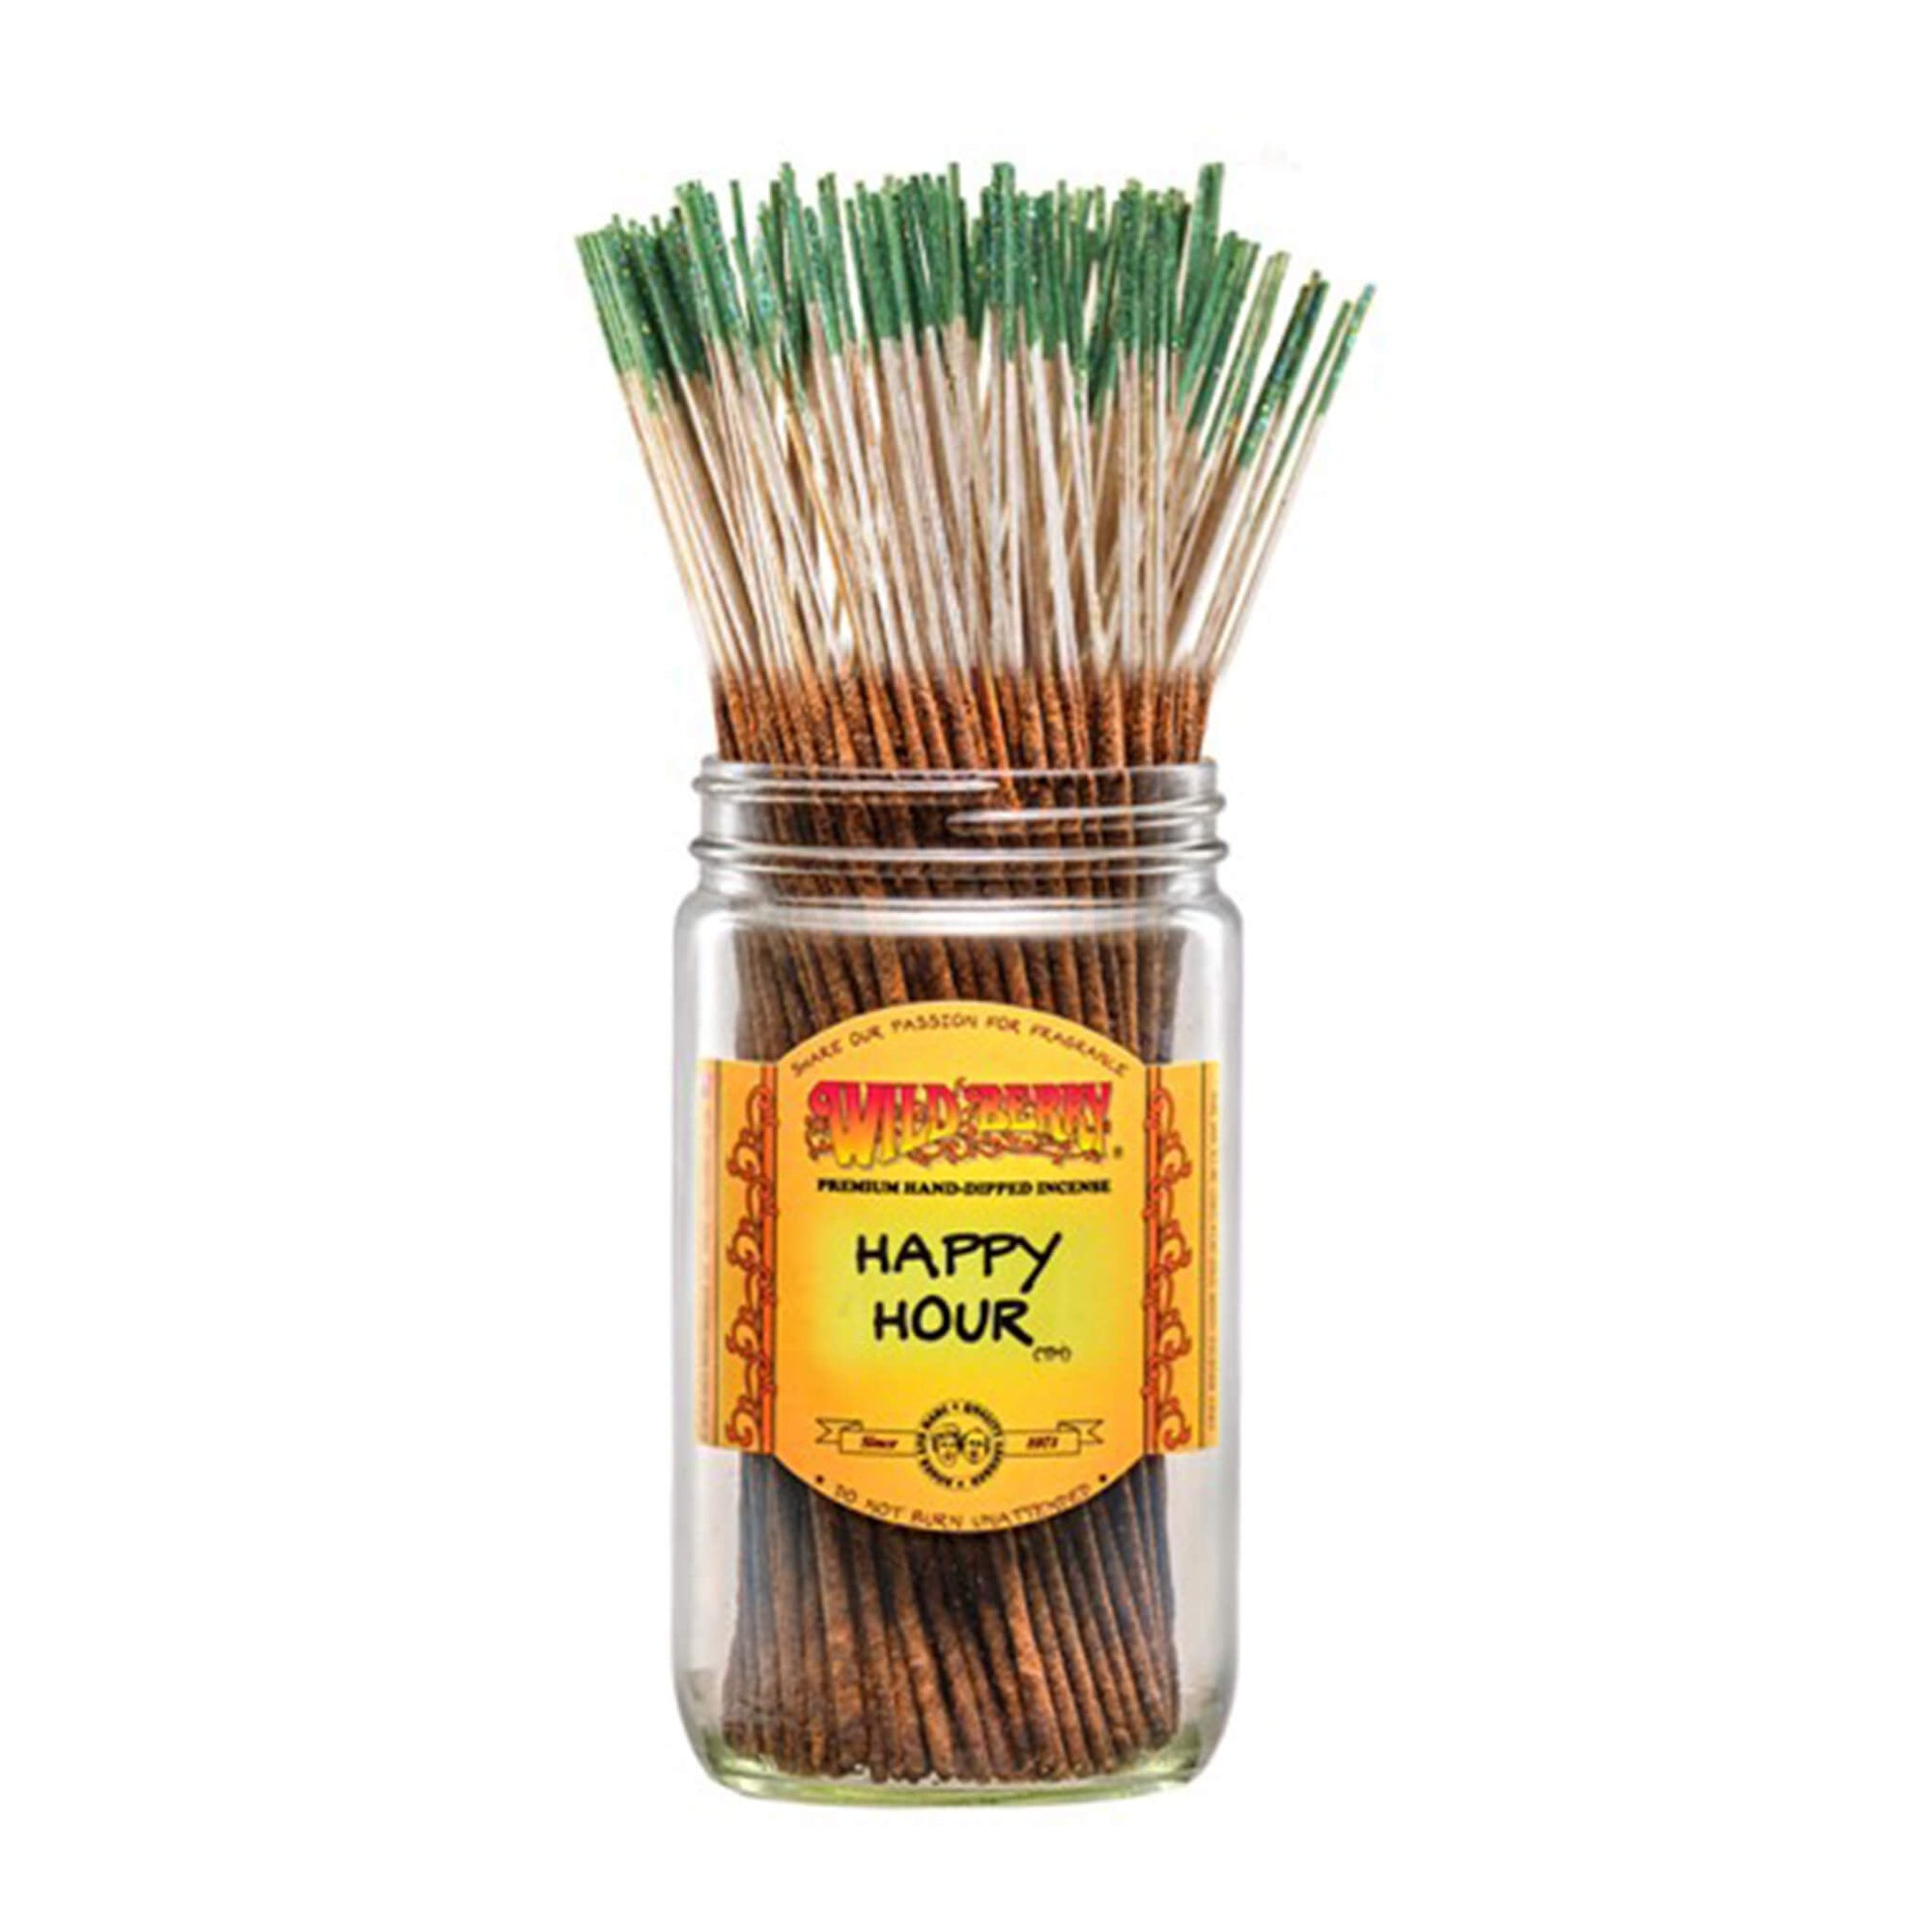 Happy Hour™ Incense Sticks | Profile View In Jar | Dabbing Warehouse